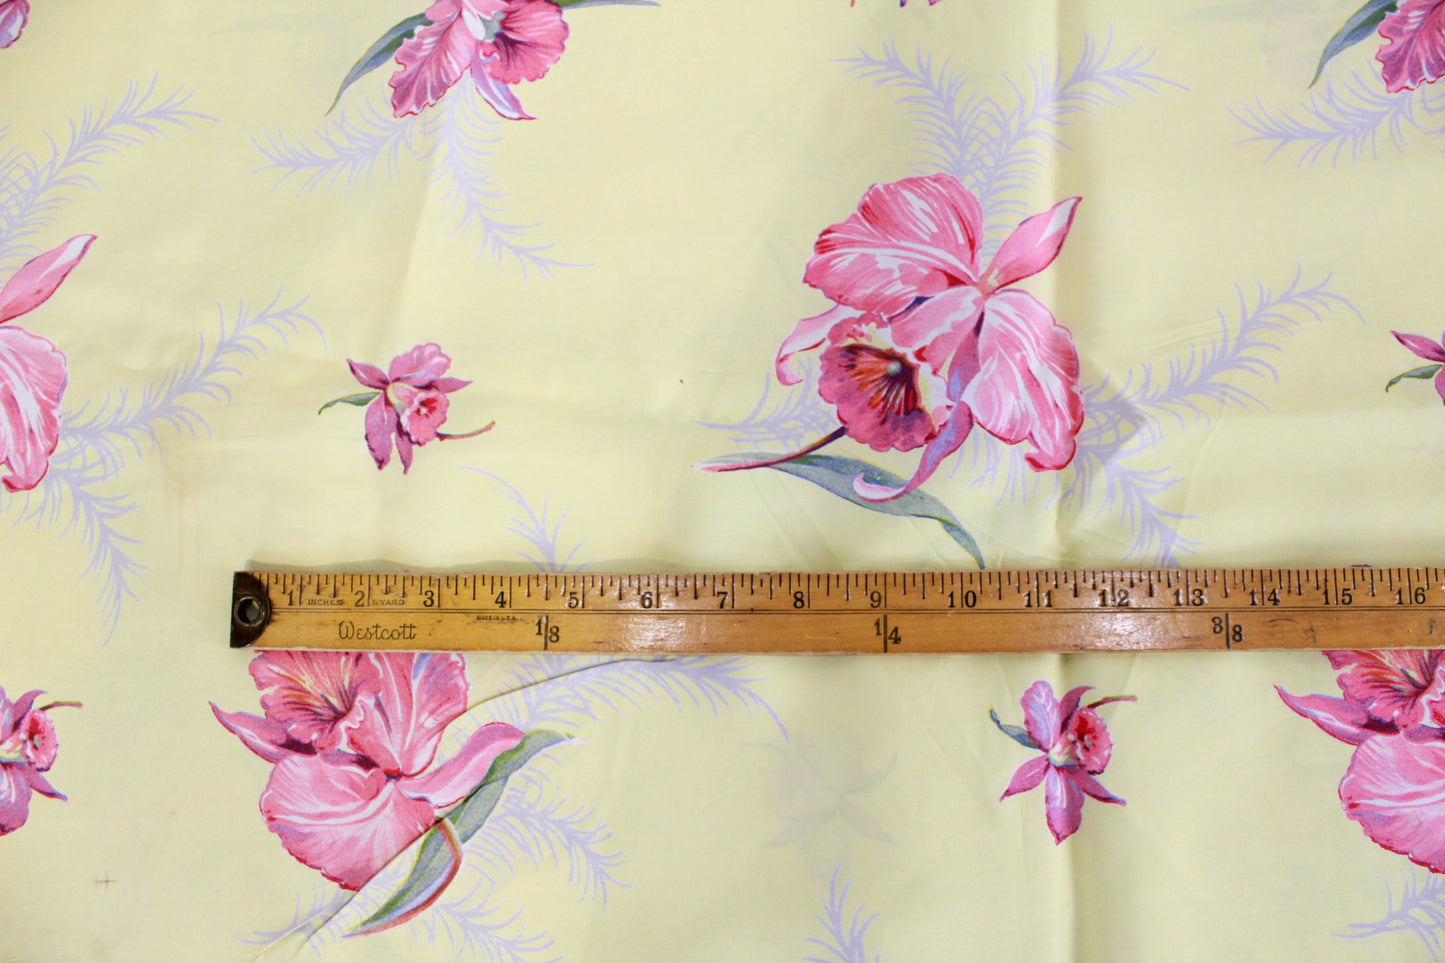 1940s yellow pink floral print rayon fabric vintage sewing dressmaking fabric